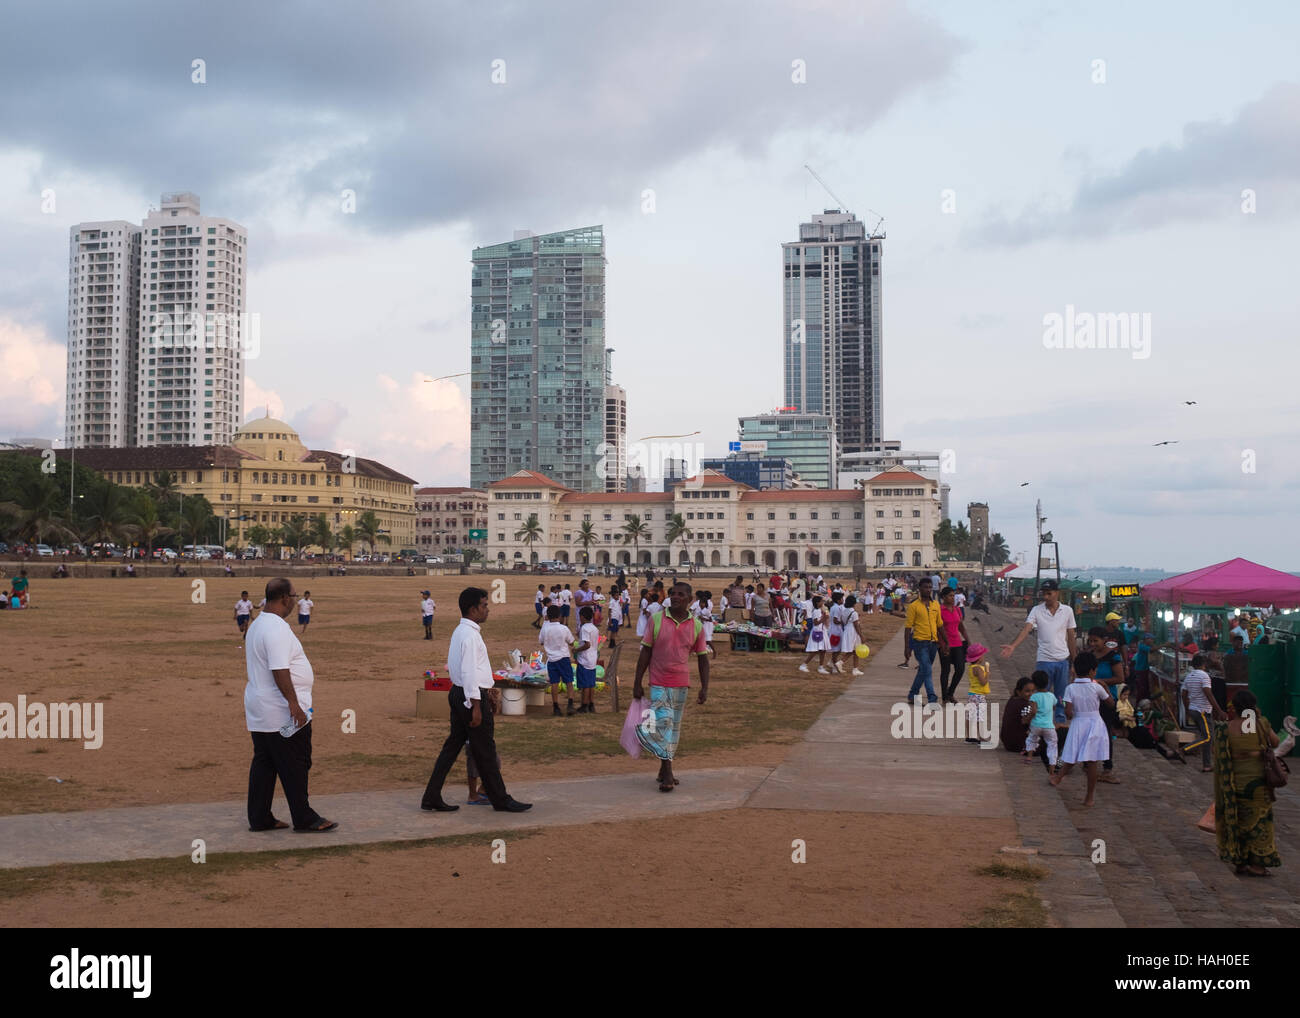 People  on the  seafront  promenade at Galle Face Green, Colombo, Sri Lanka, Stock Photo